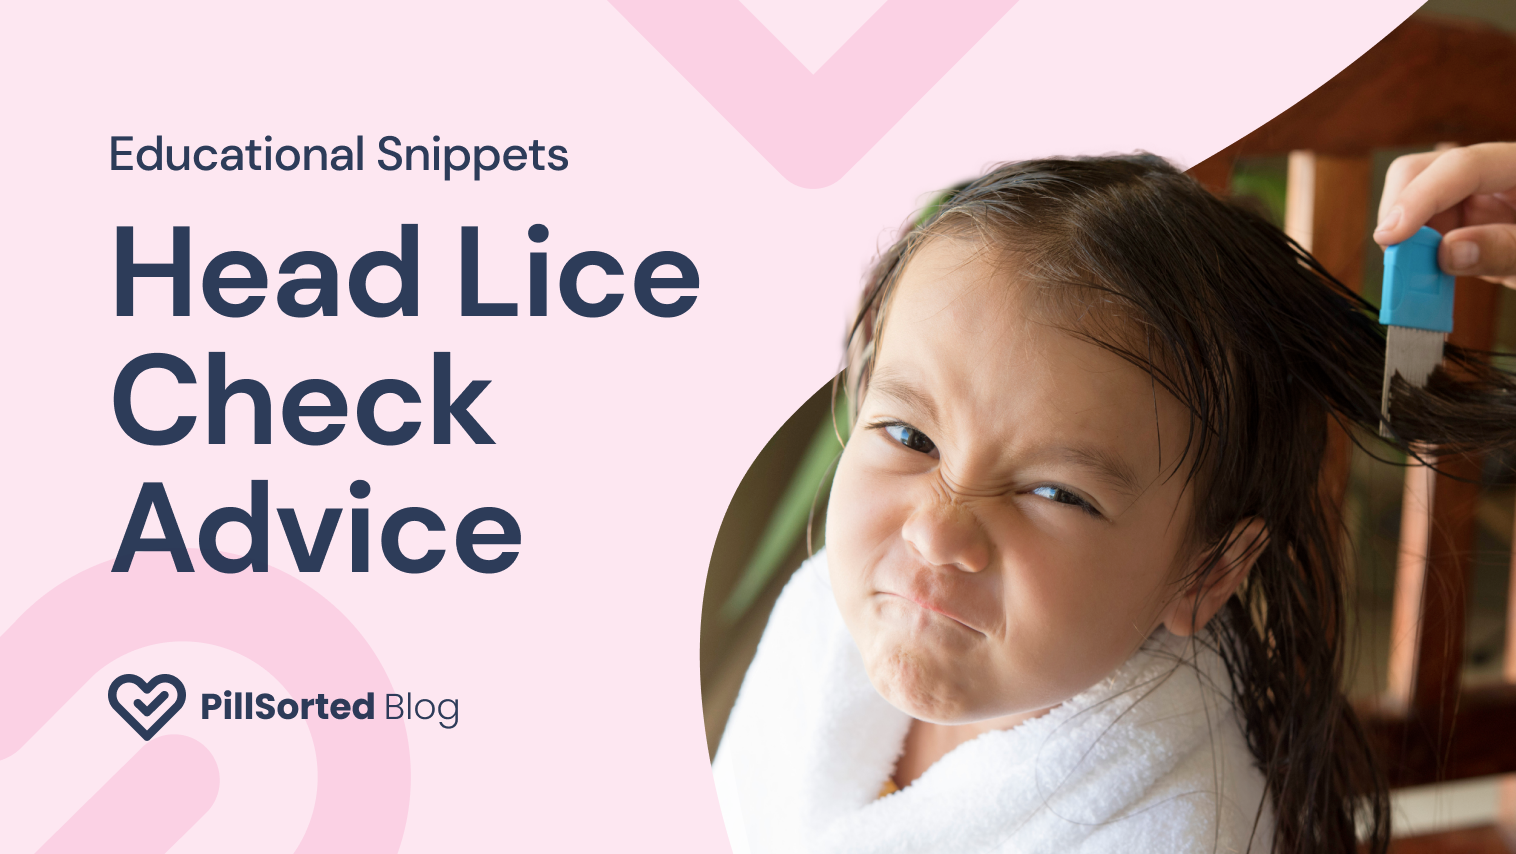 How to Perform a Head Lice Check: Step-by-Step Guide